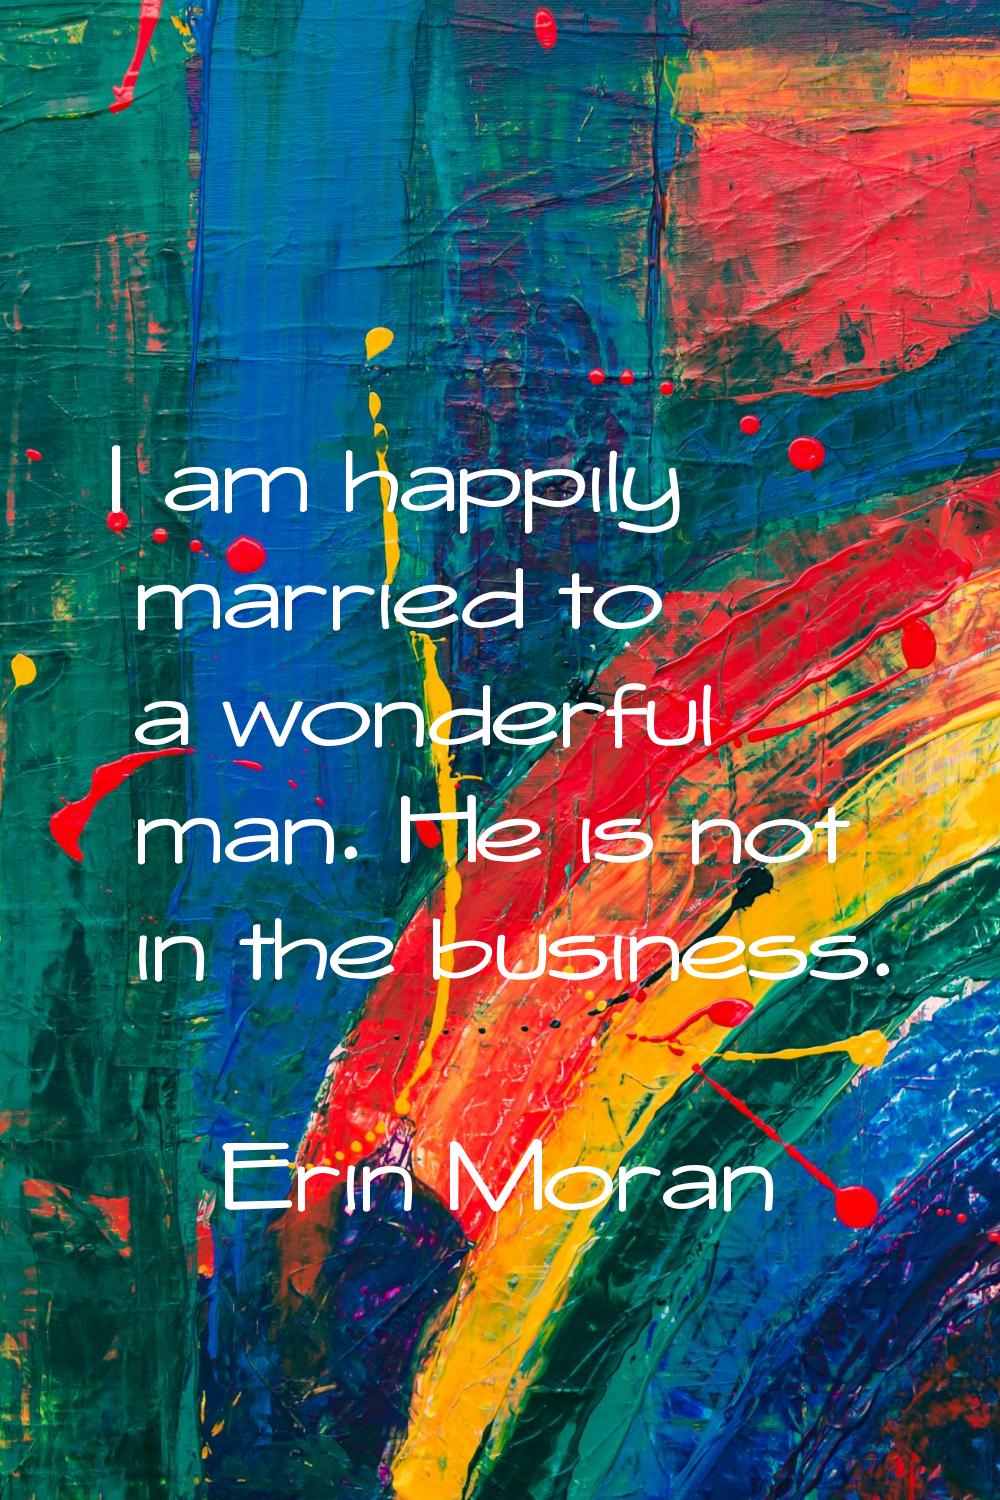 I am happily married to a wonderful man. He is not in the business.